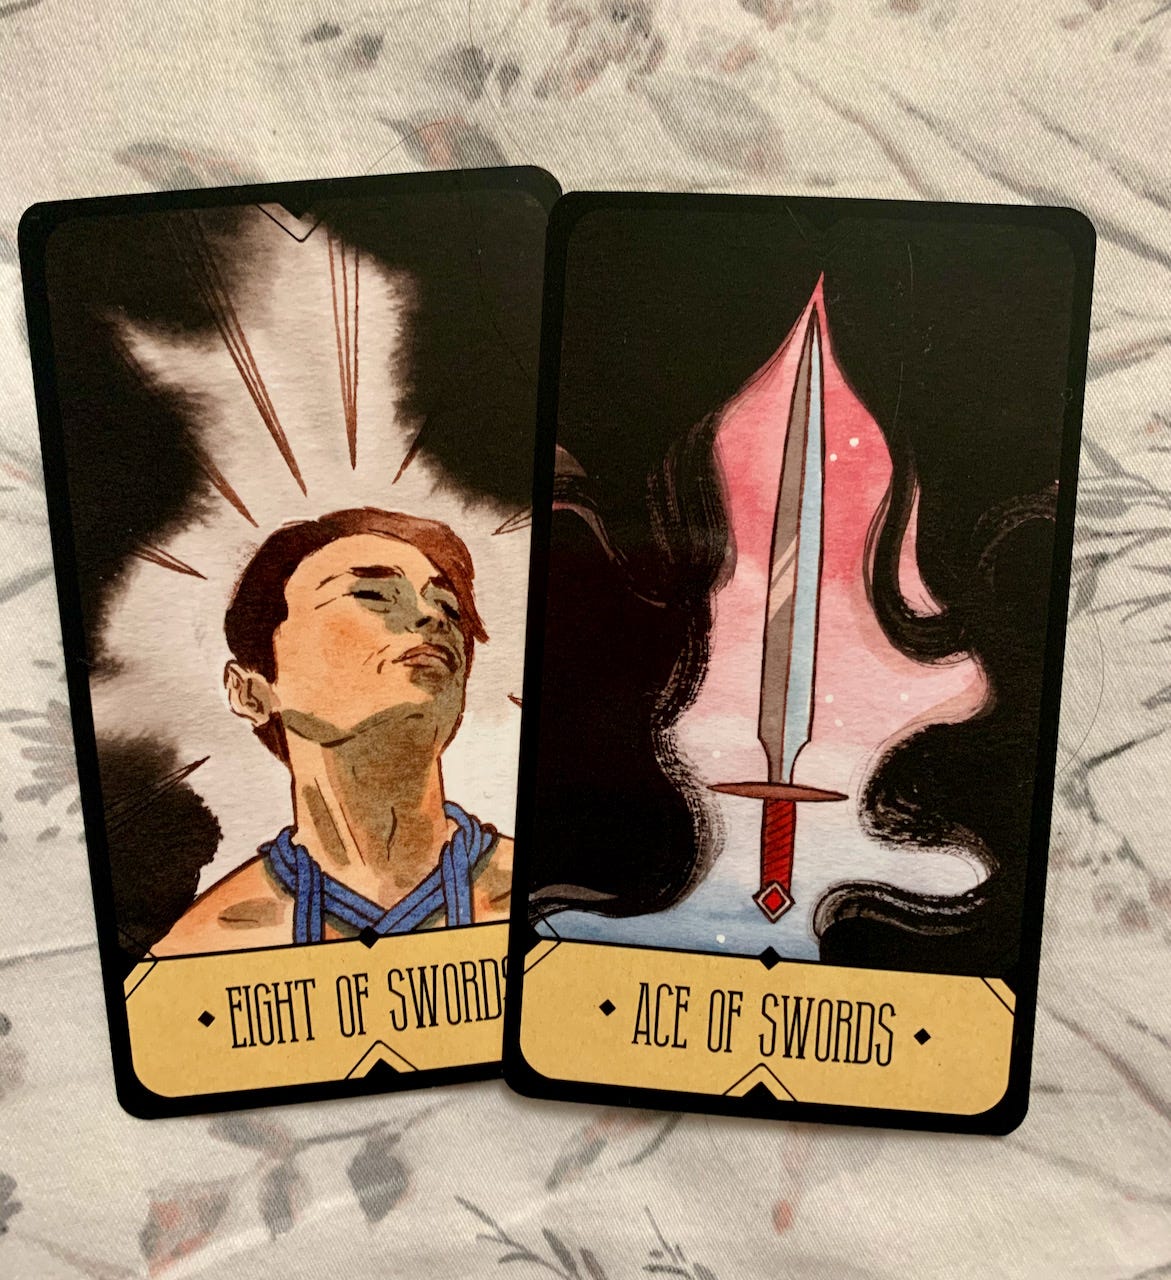 Eight of swords is a man’s face, eyes closed, surrounded by darkness. Eight sword points are poking out from the dark. The Ace of Swords is the same swirling darkness, but a single sword is shown clearly through it, on  a red and blue background. 